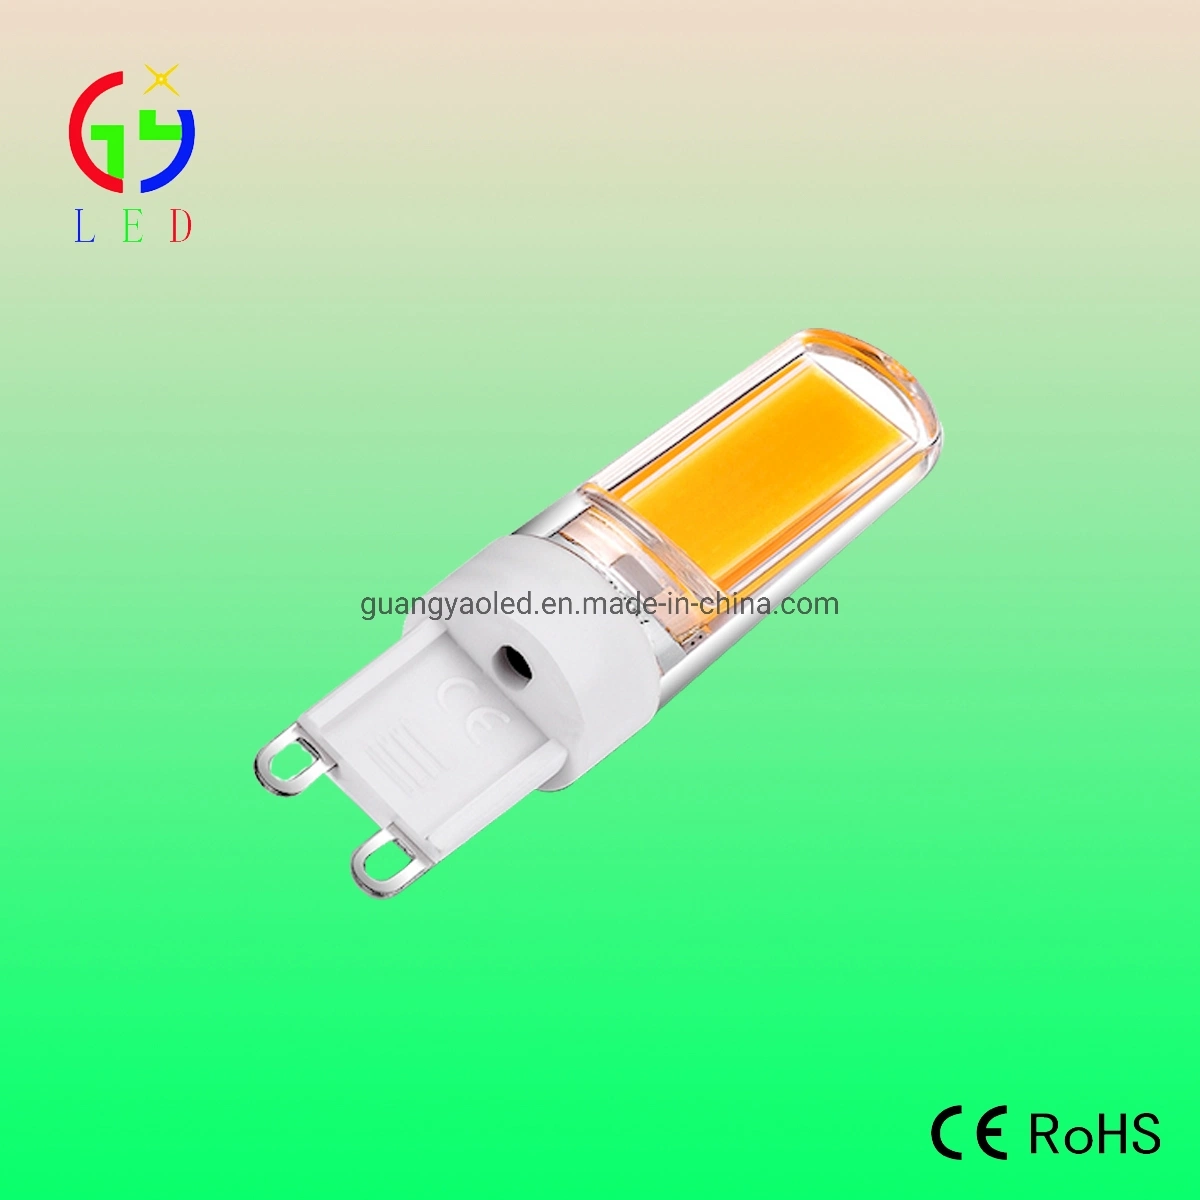 Newest LED G9 COB 2609 Bulbs, LED G9 COB 3W Crystal Paddle Style Lamps, LED G9 Transparent Silicone Bulbs for Corridor/Restaurants Lights